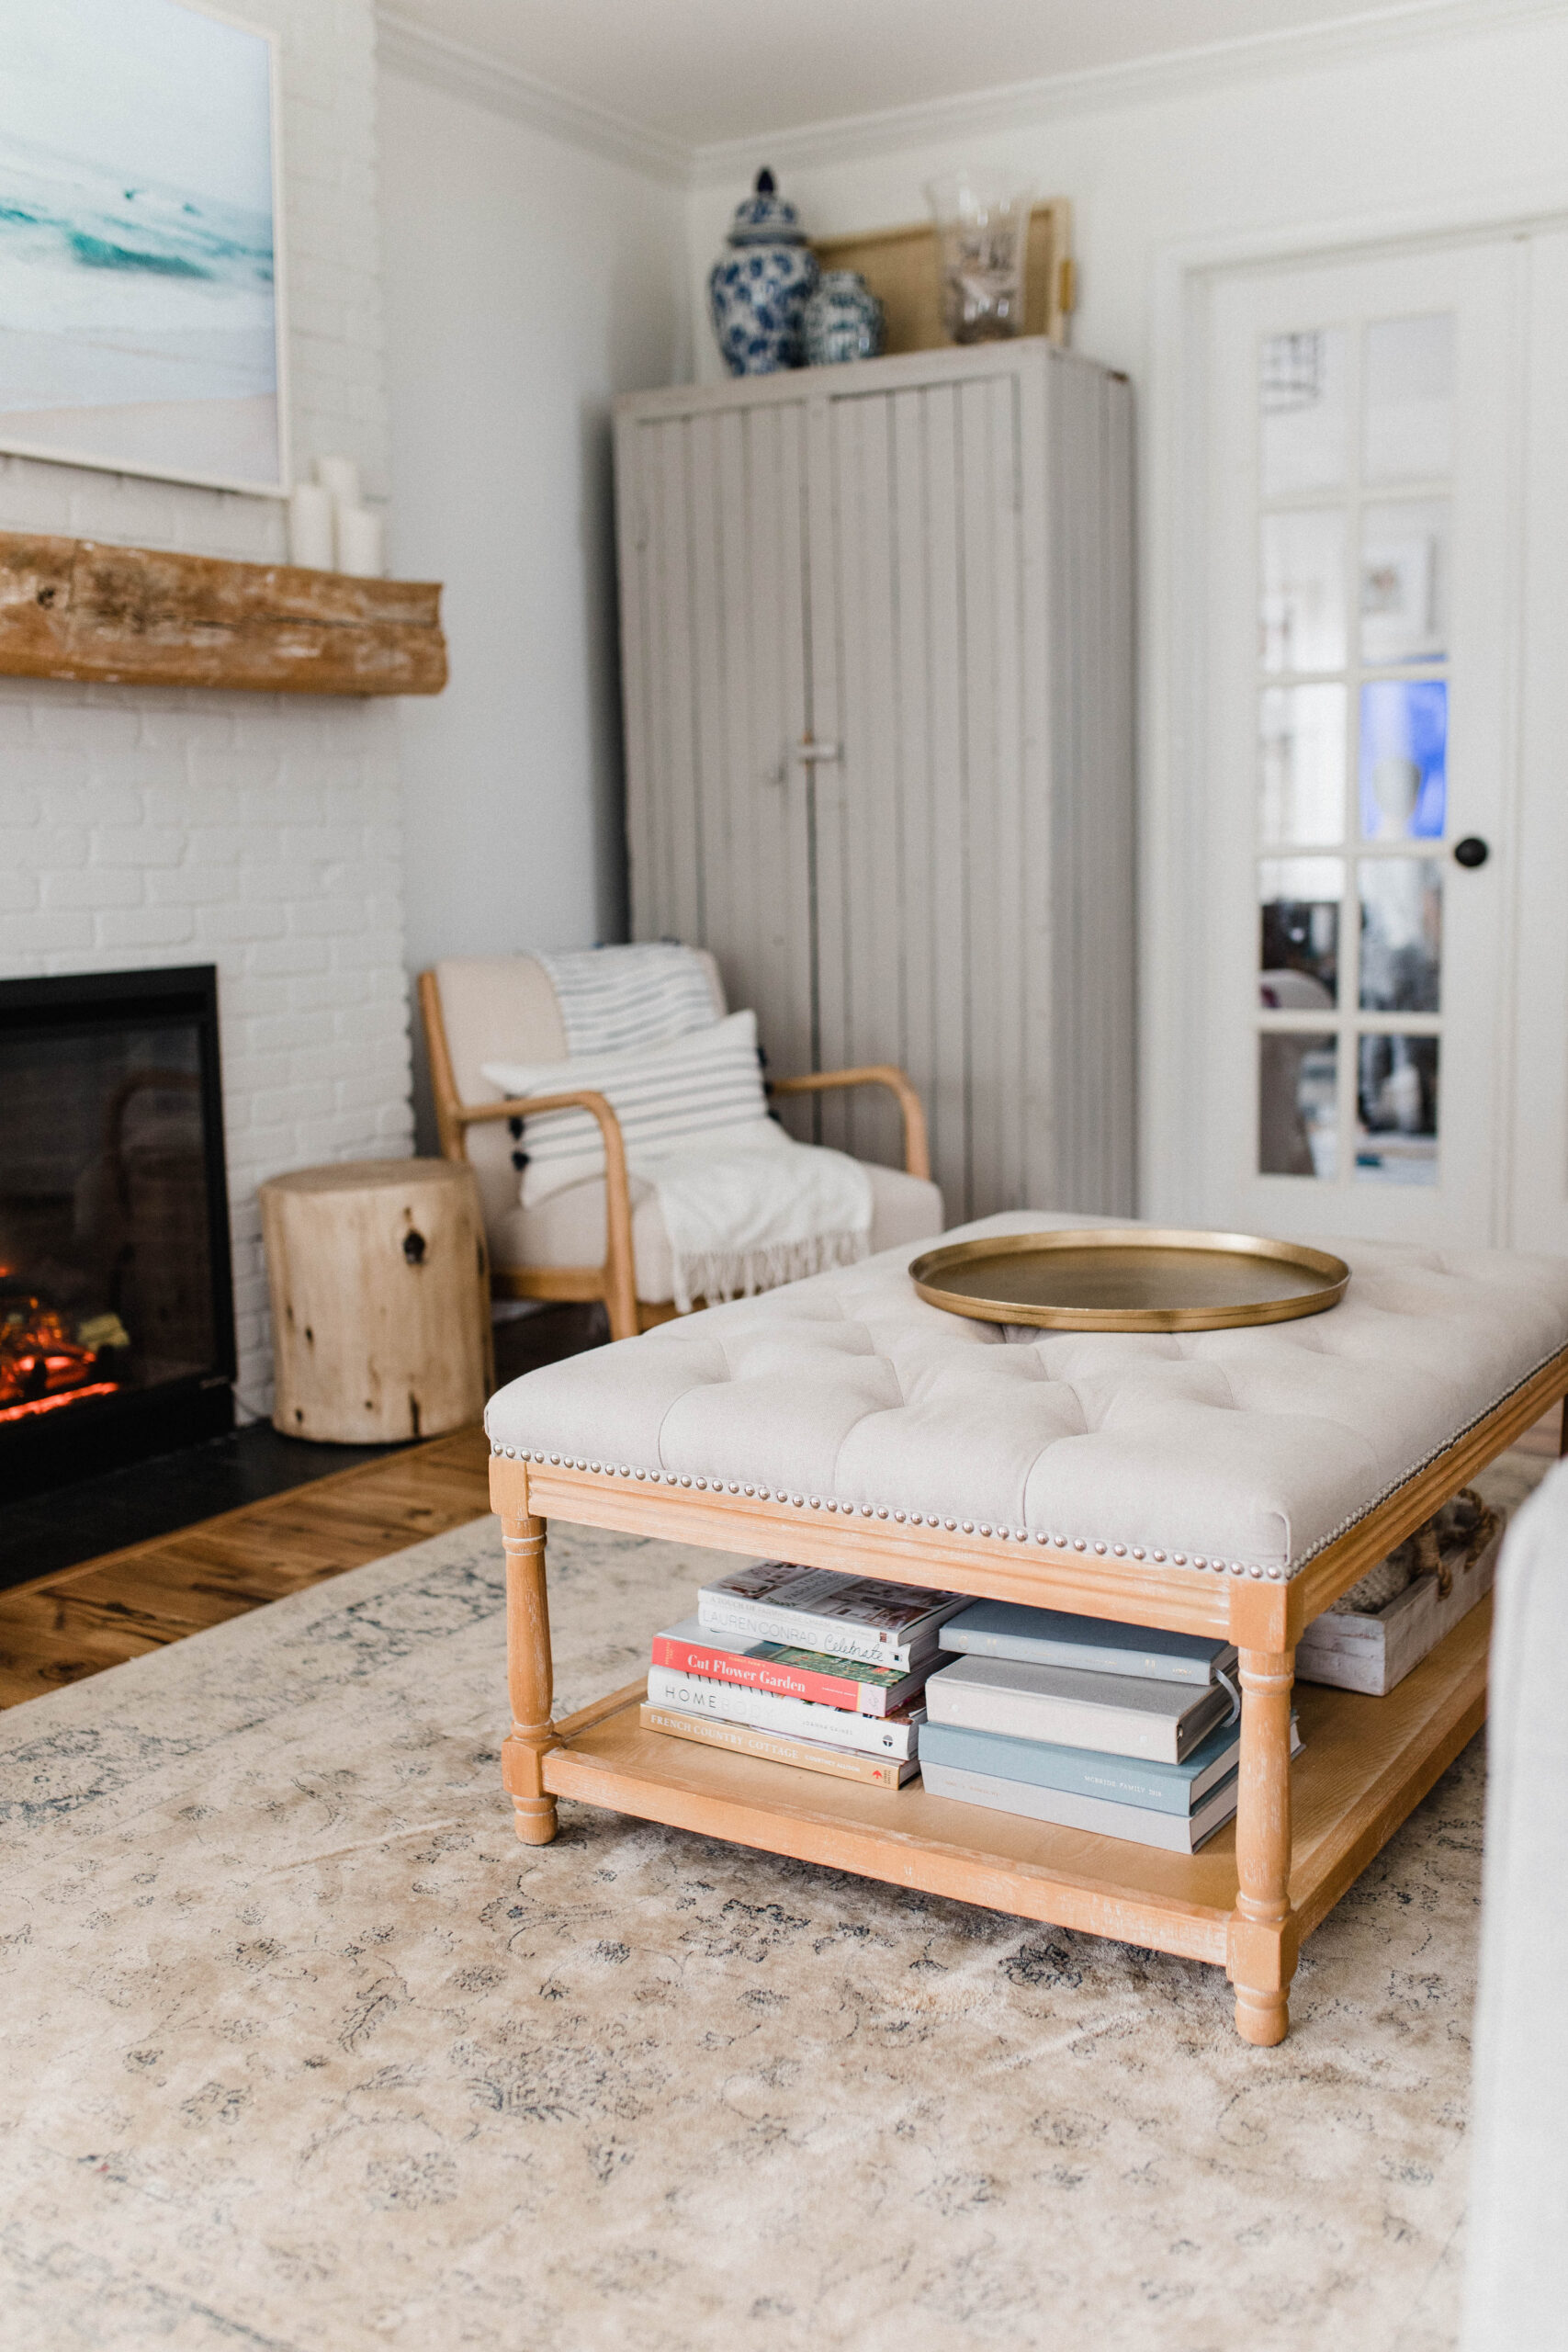 Connecticut life and style blogger Lauren McBride shares a home tour of her East Coast casual living room space, complete with source list.